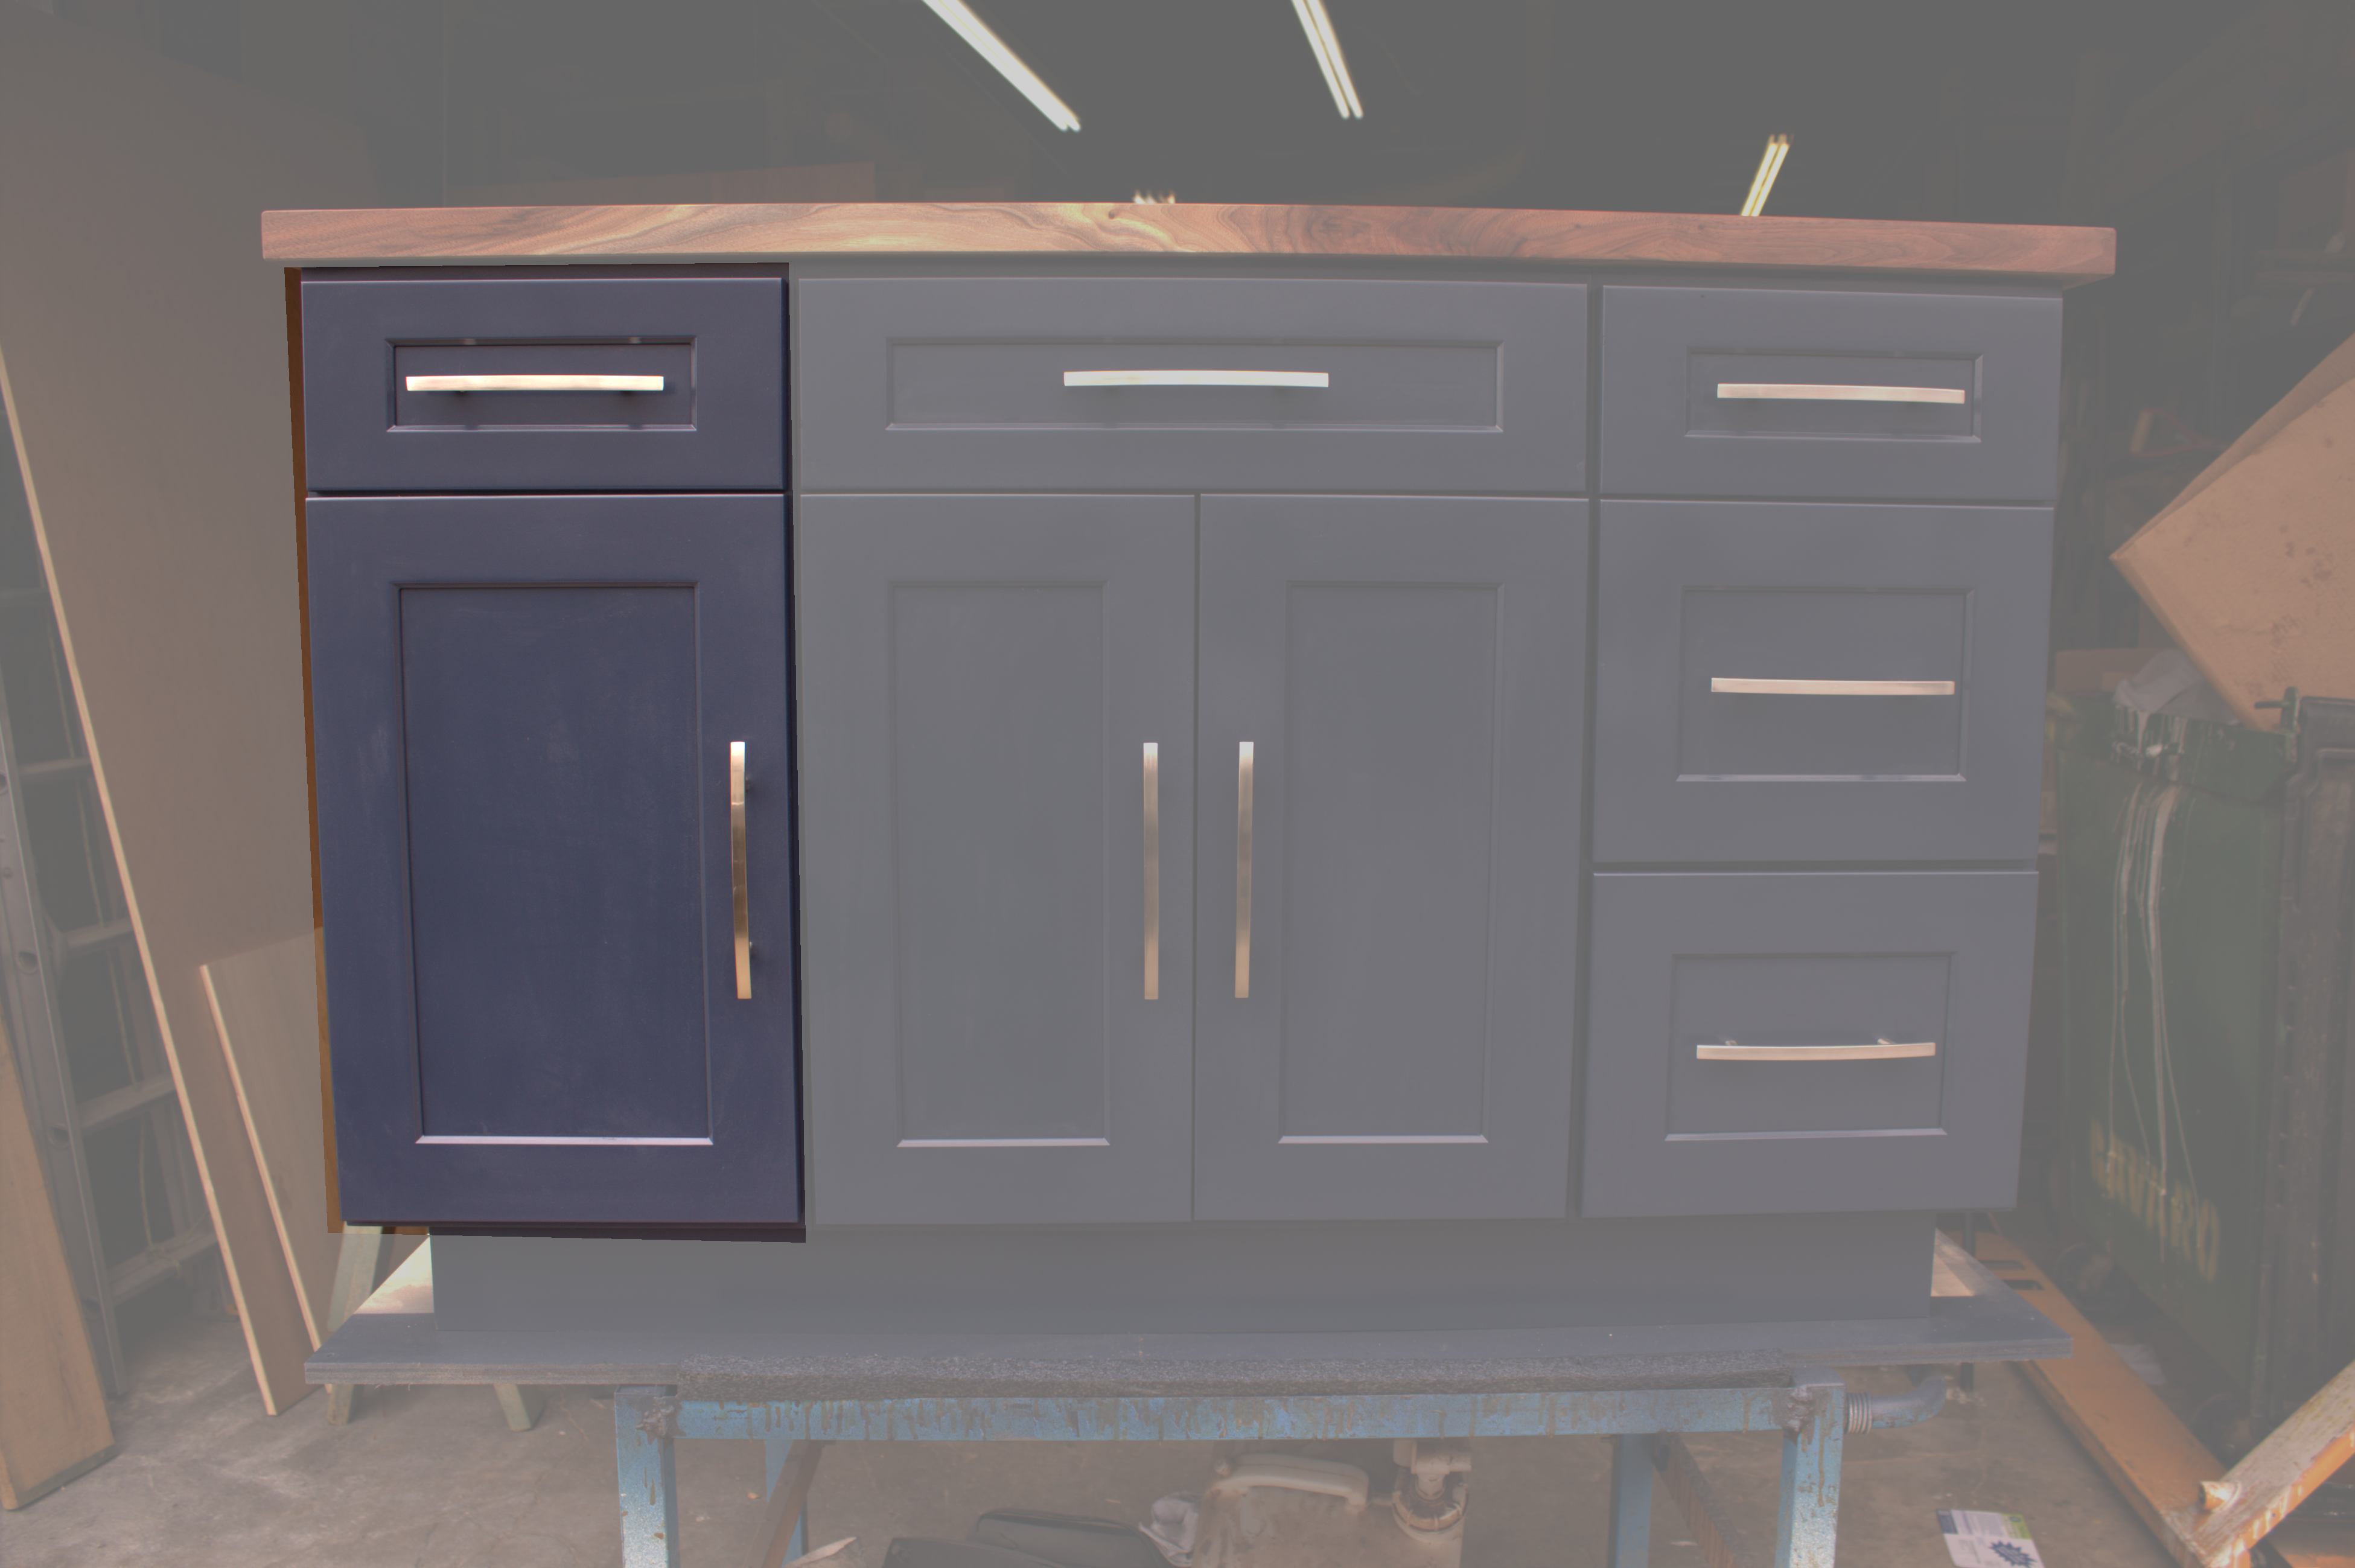 Left Single drawer / Single Door (Hardware not included) for Navy Blue Kitchen Island